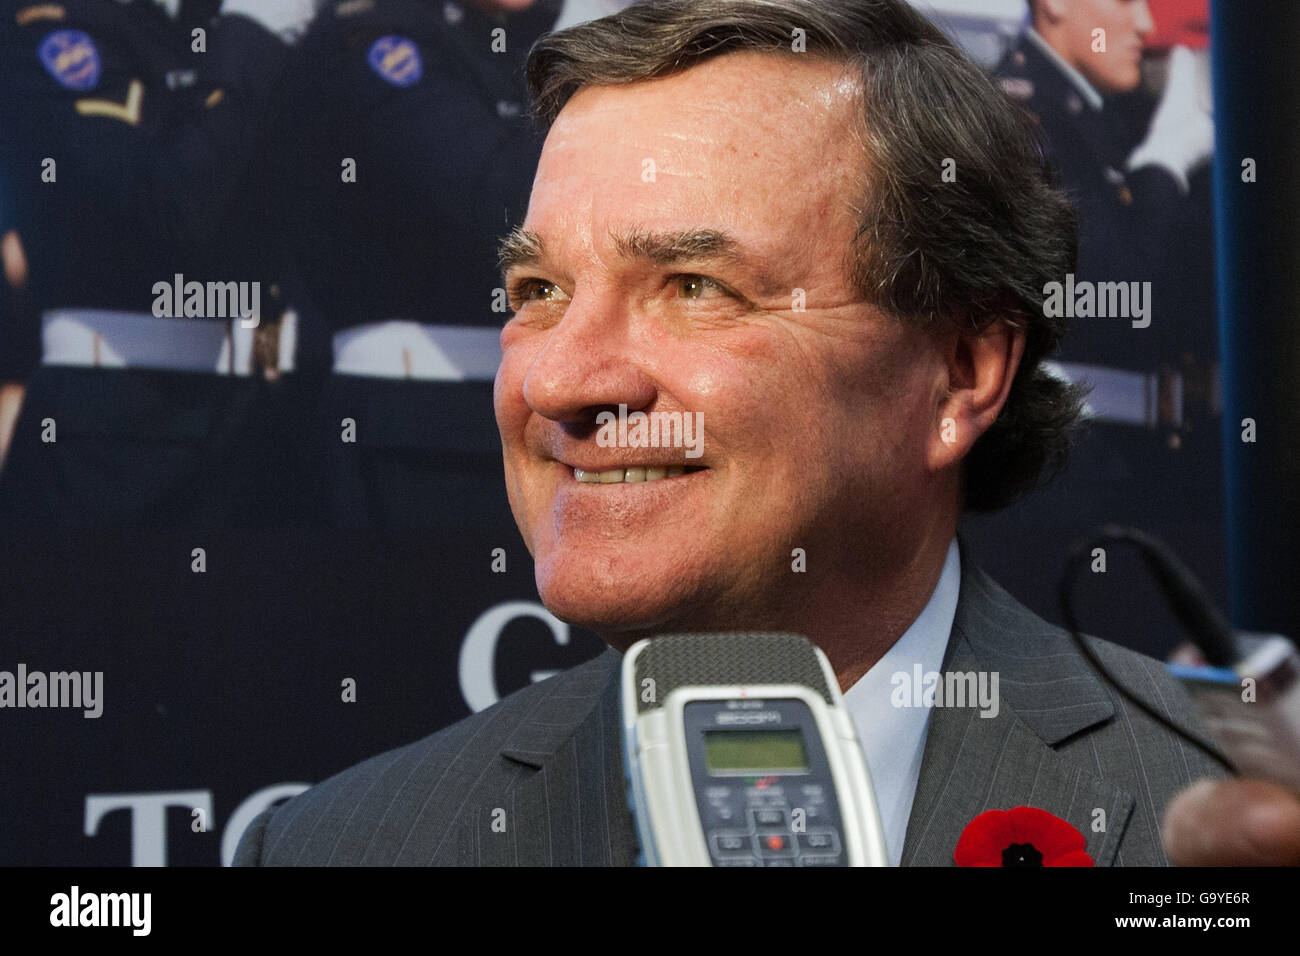 Quinte West, Ontario, Canada. 31st Oct, 2011. Finance Minister Jim Flaherty speaks during a press conference in Quinte West, Ont., on Oct. 31, 2011. © Lars Hagberg/ZUMA Wire/Alamy Live News Stock Photo